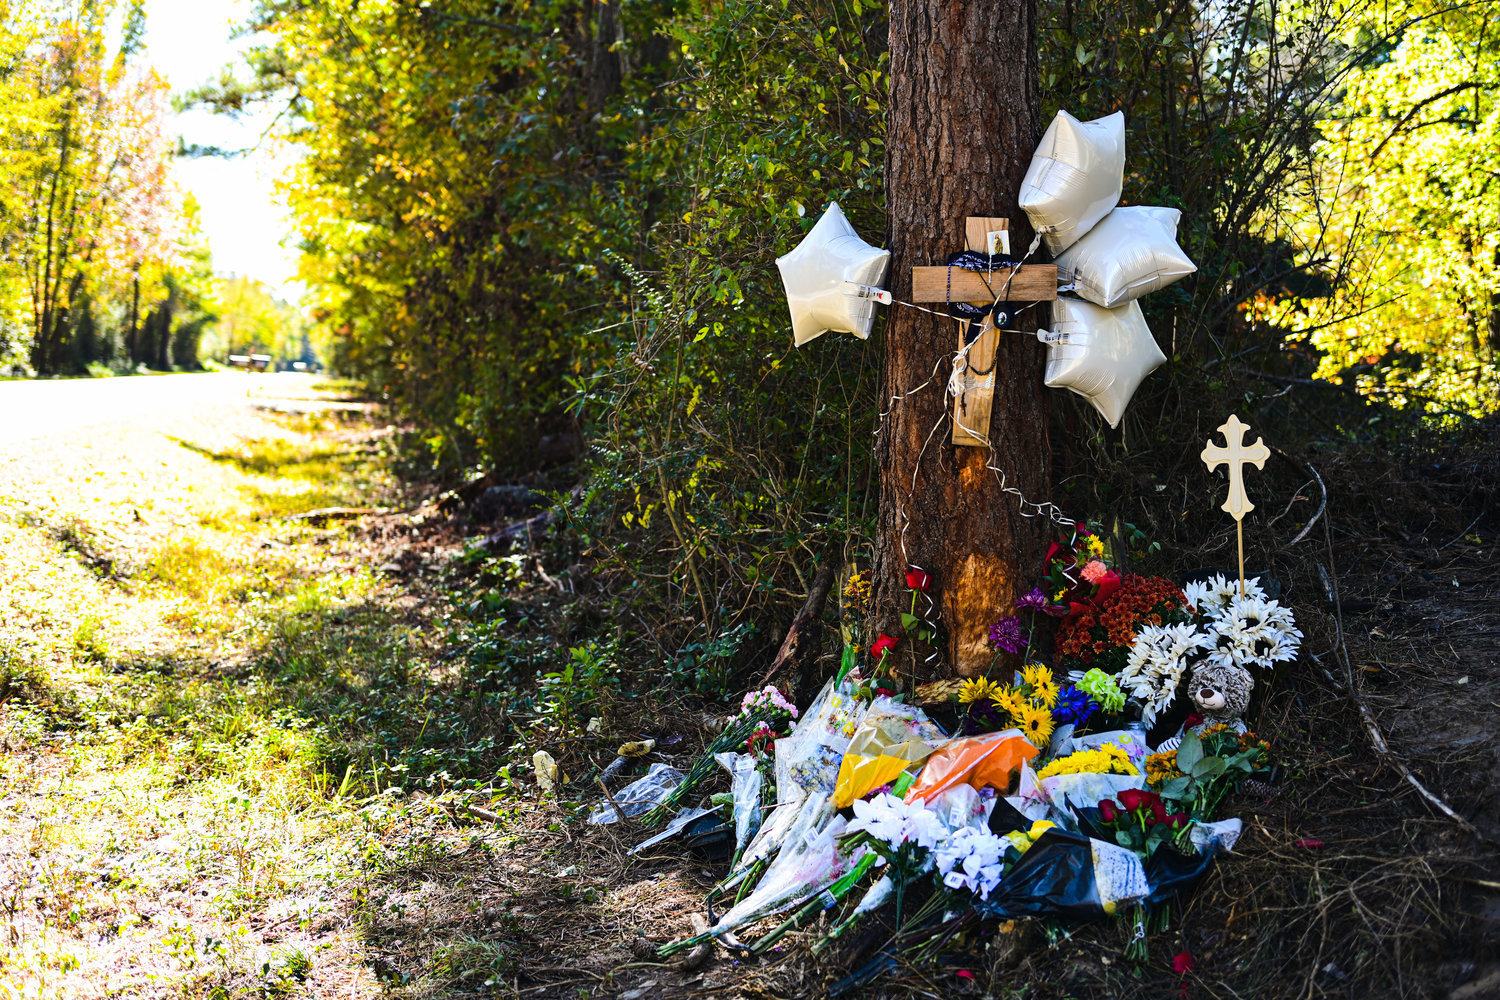 A roadside memorial for 18-year-old Northwood student Bryan Vilchis, who died in a car crash in Pittsboro on Old Graham Road Saturday on Oct. 23. One week and a day after the crash, 16-year-old Desmond "Junior" Patterson also died. 'This is an extremely painful time for our Northwood staff and students,' said Superintendent Dr. Anthony Jackson. 'We grieve with Desmond’s and Bryan’s families and mourn their loss.' (Picked by Hannah McClellan)